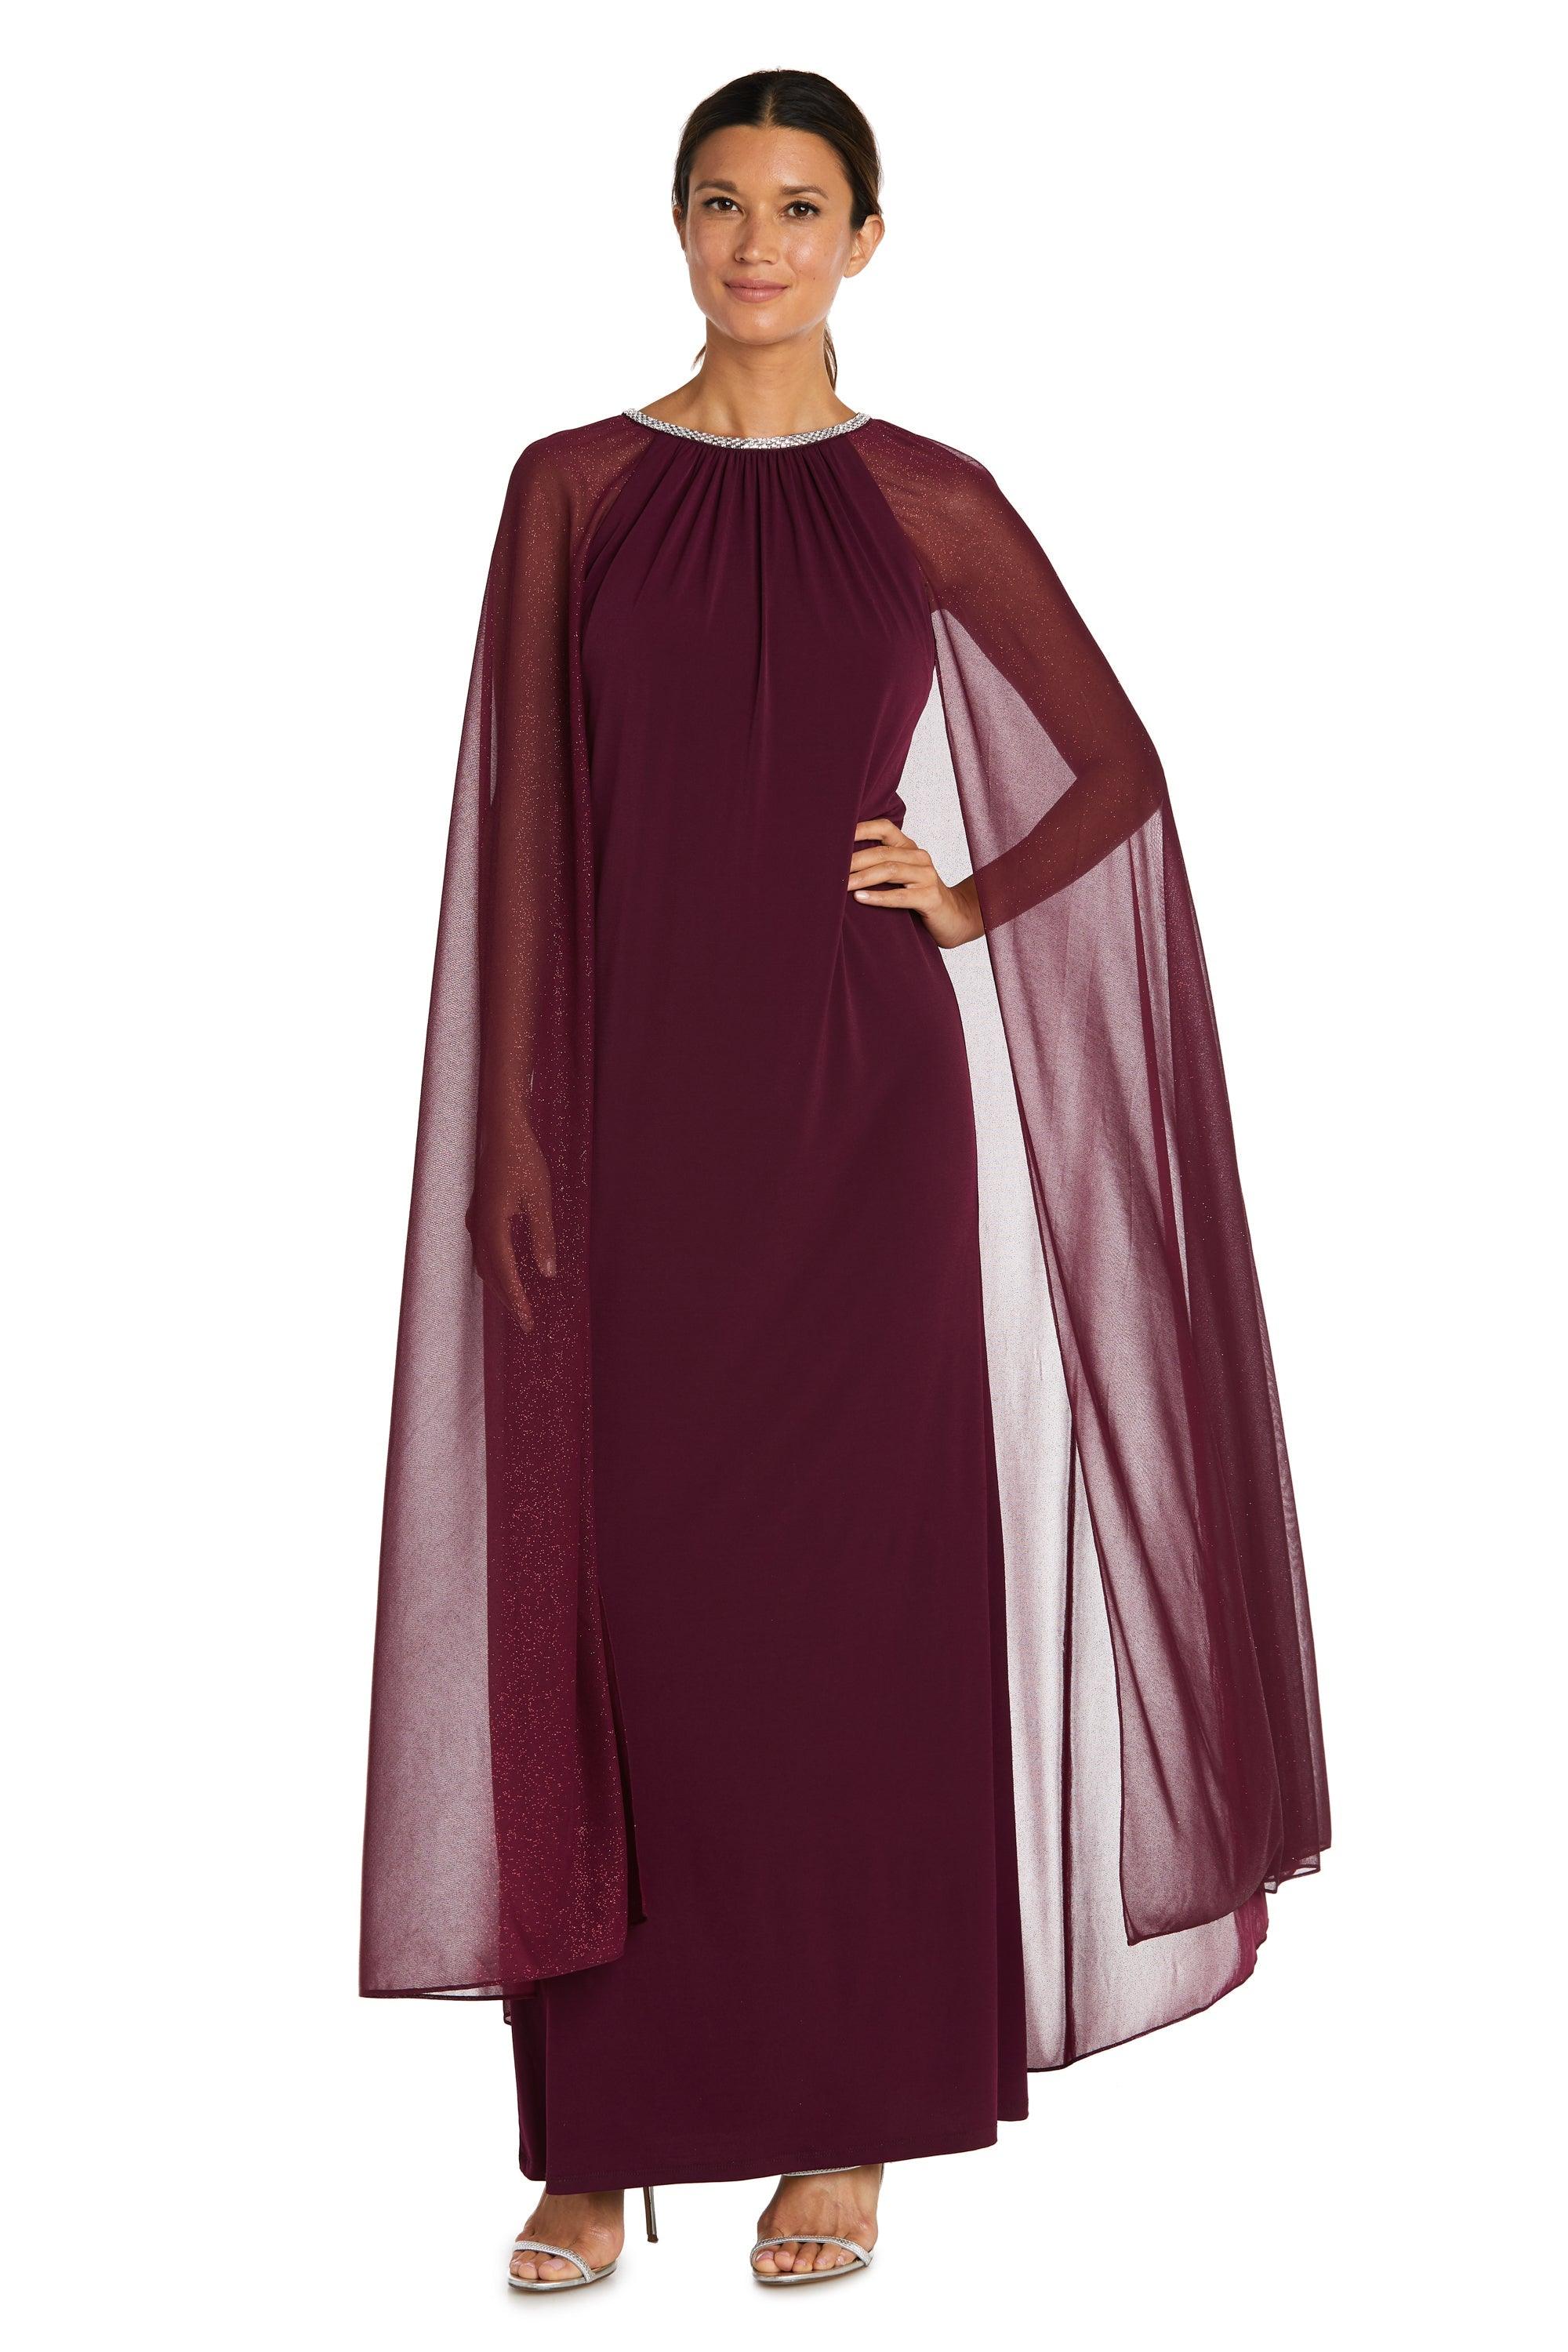 R&M Richards Long Mother of the Bride Dress CLEARANCE - The Dress Outlet